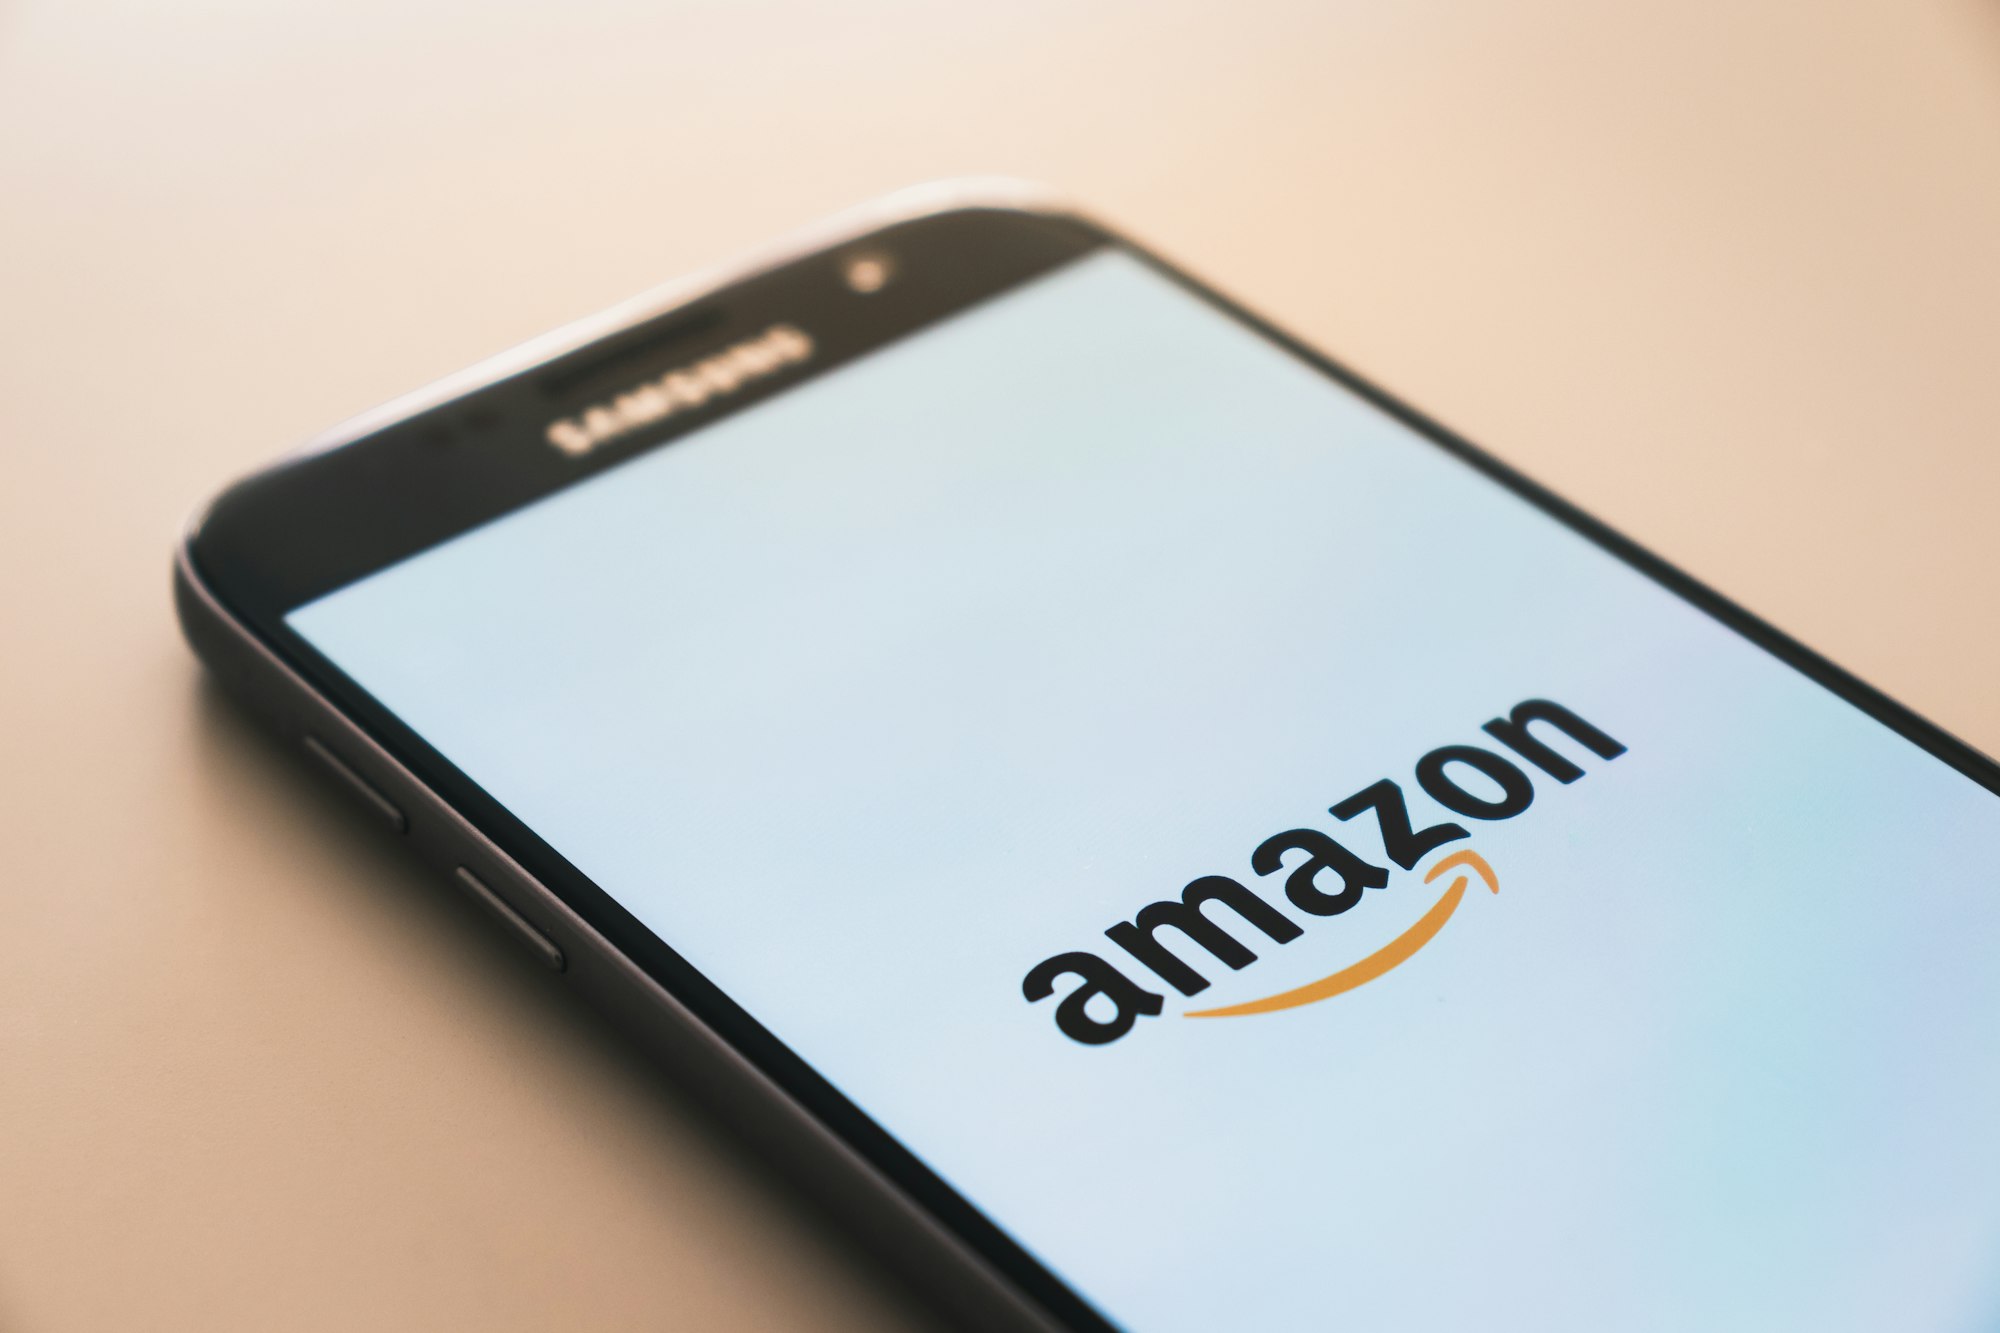 Amazon invests $12.7 billion in Indian cloud market